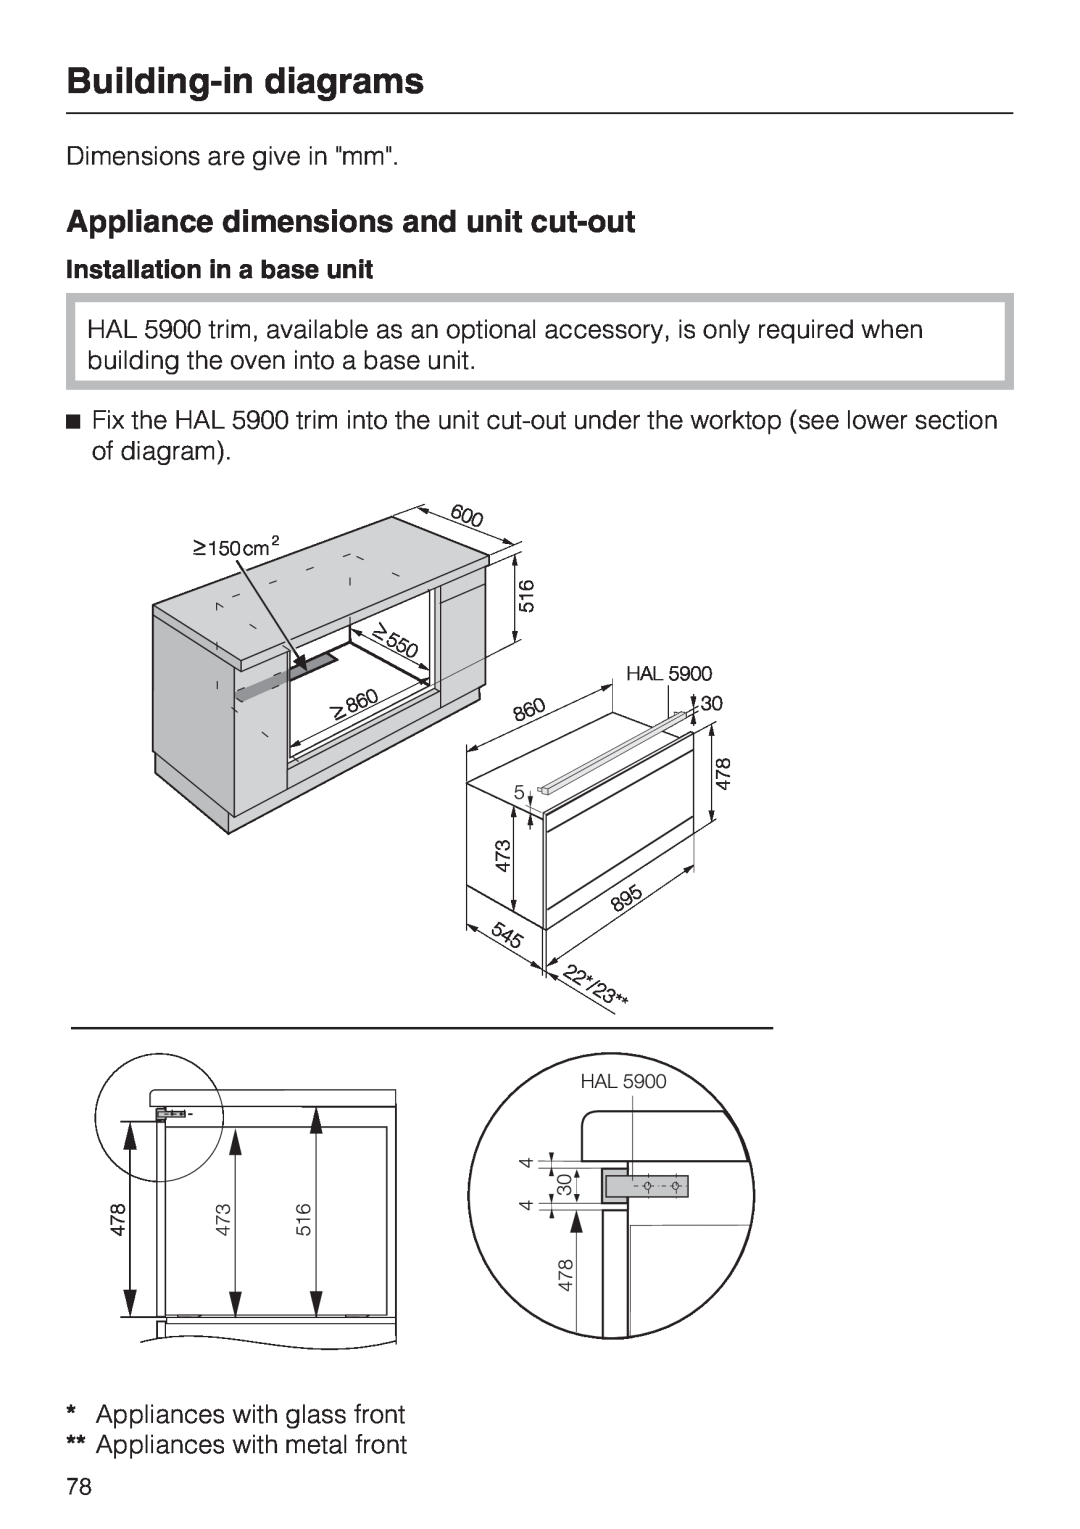 Miele H 5961 B Building-indiagrams, Appliance dimensions and unit cut-out, Installation in a base unit 